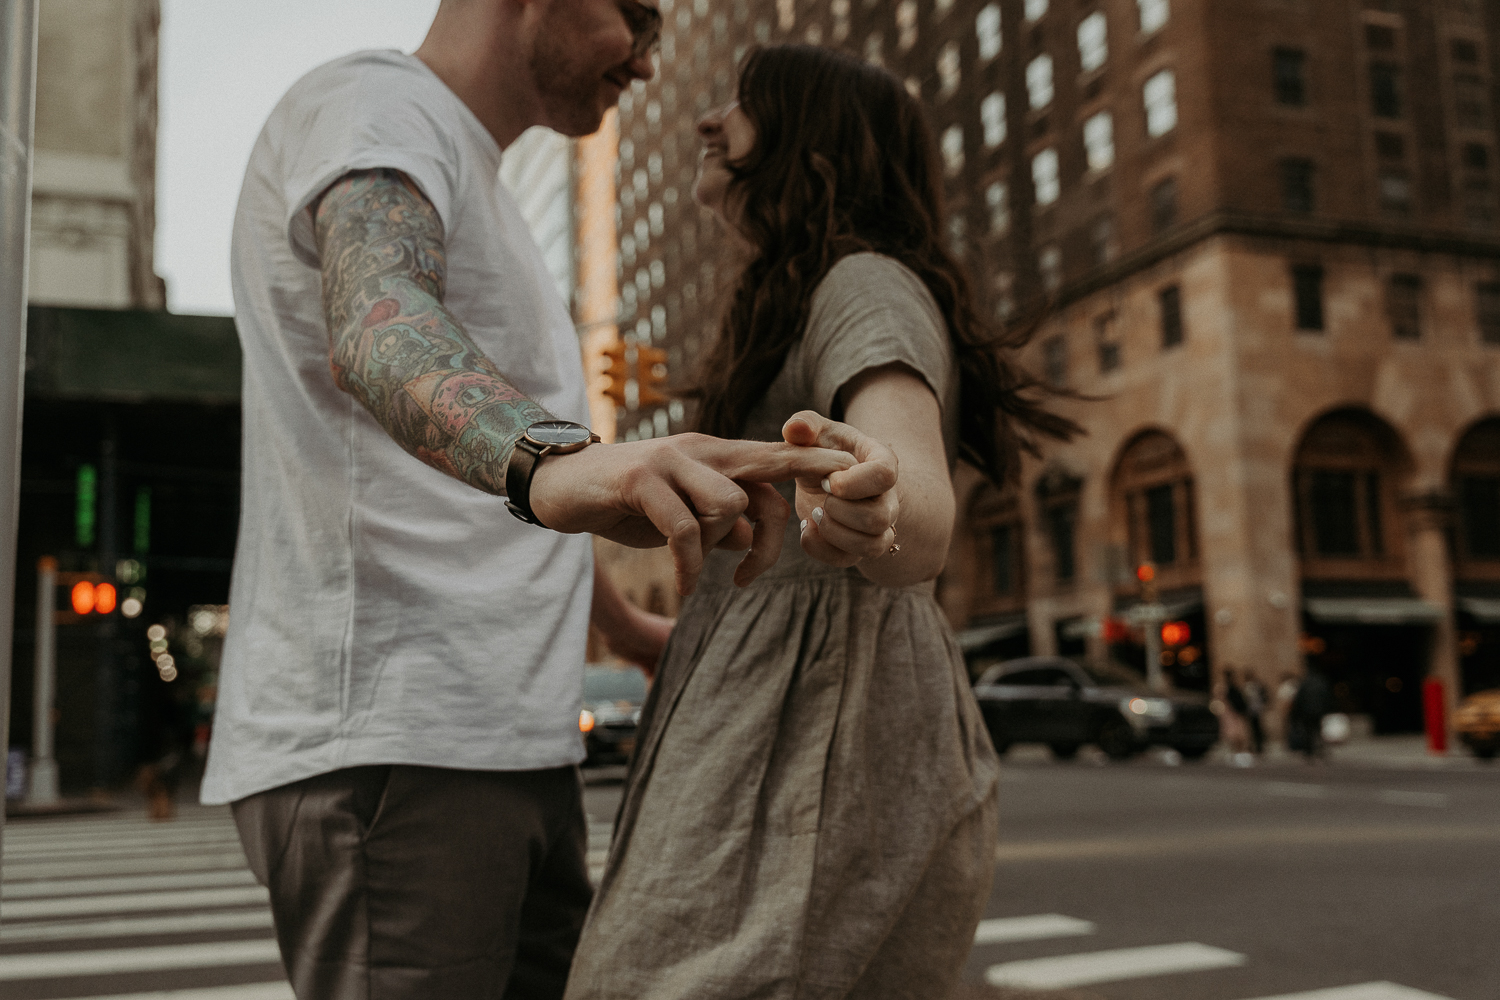 golden hour engagement session in new york city. urban and adventurous vibes.